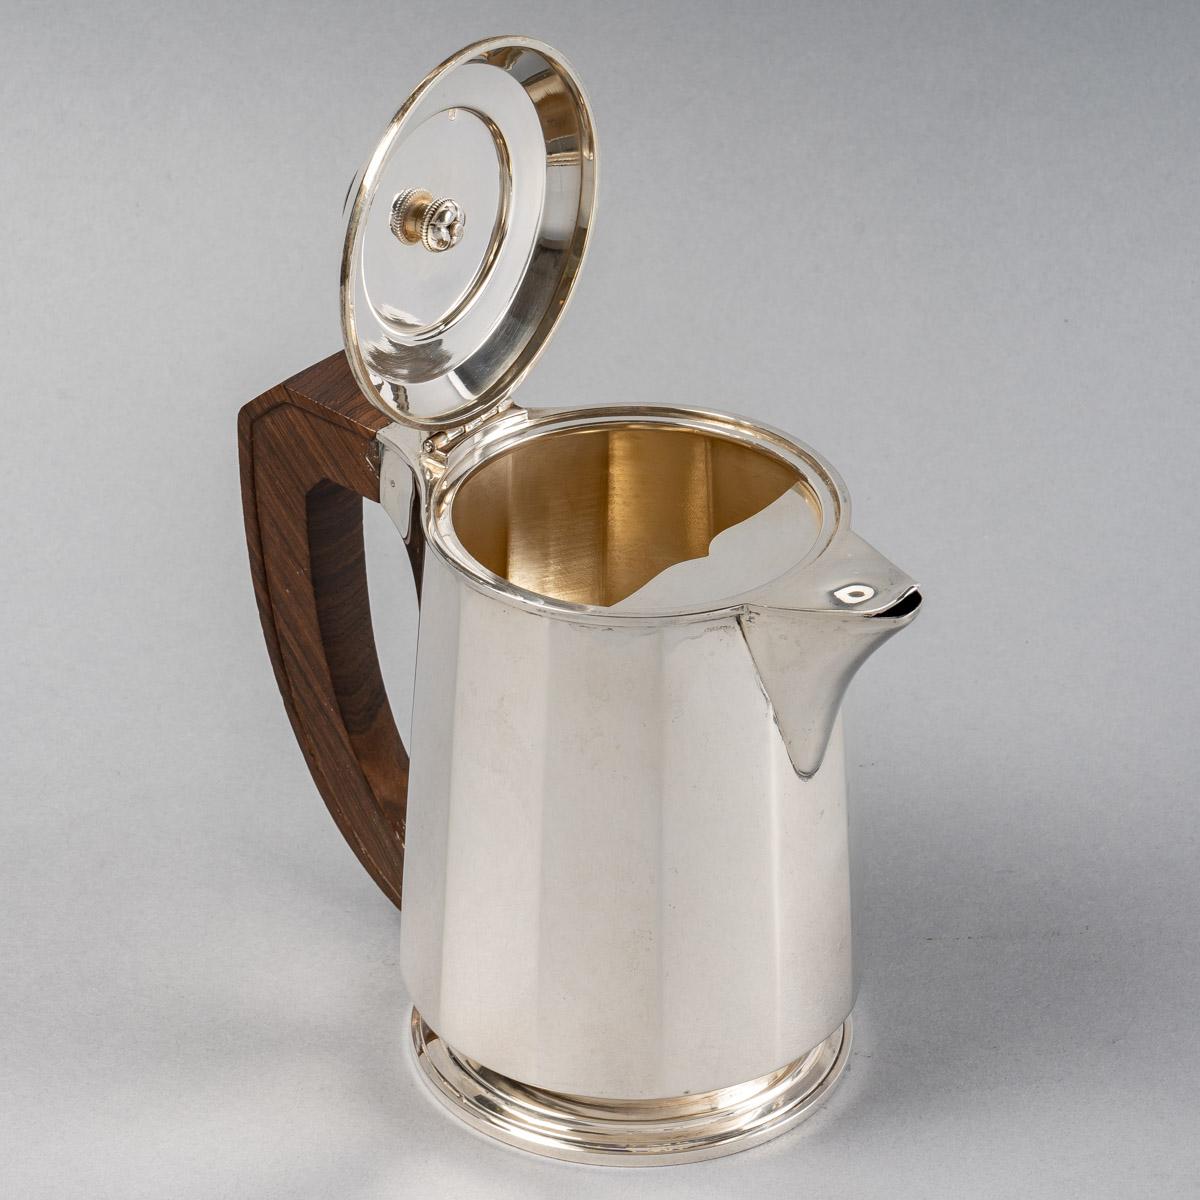 1925 Puiforcat, Tea and Coffee Service in Sterling Silver and Rosewood In Good Condition For Sale In Boulogne Billancourt, FR